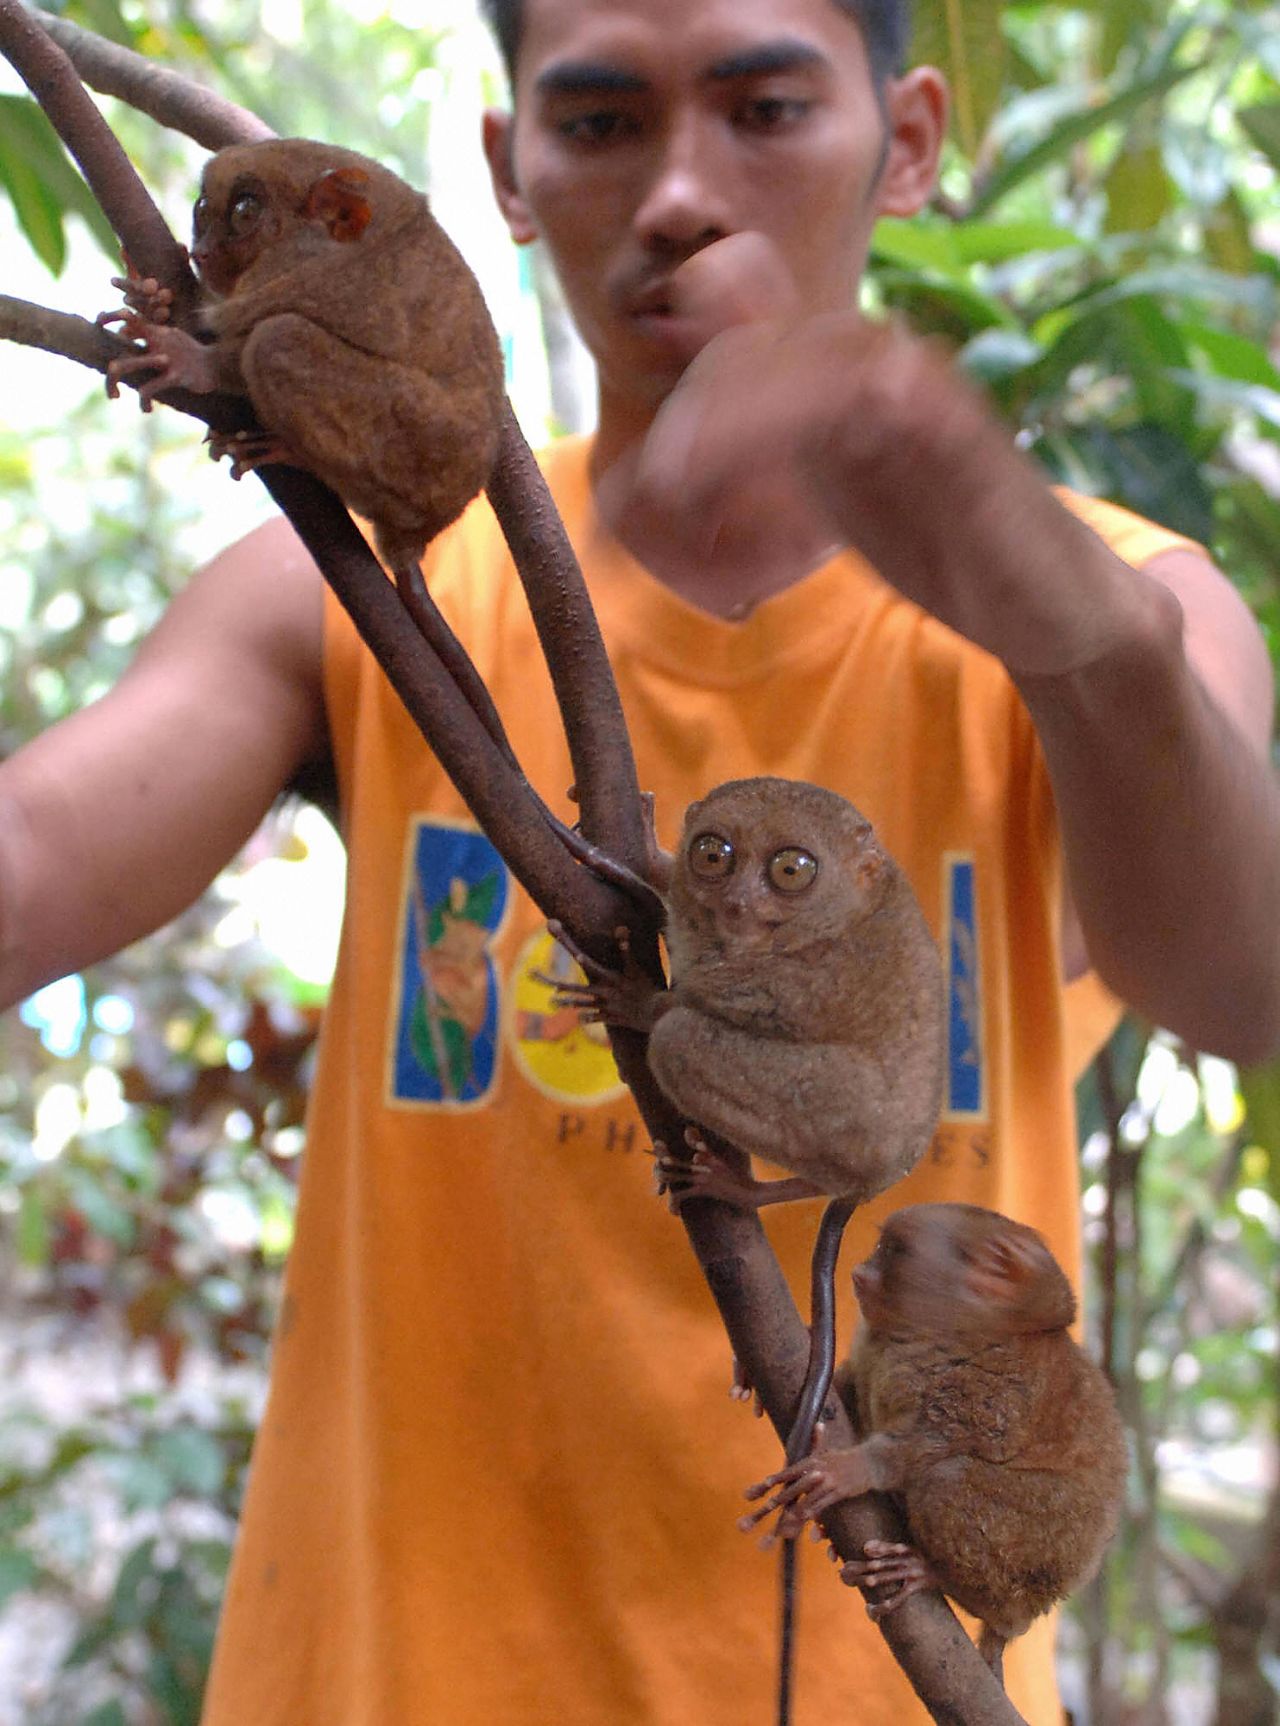 <strong>Free rei</strong><strong>n</strong>: The Foundation looks after roughly 100 of these animals across a 8.4-hectare forested sanctuary, with one open observational enclosure that allows tarsiers to come and go as they please.